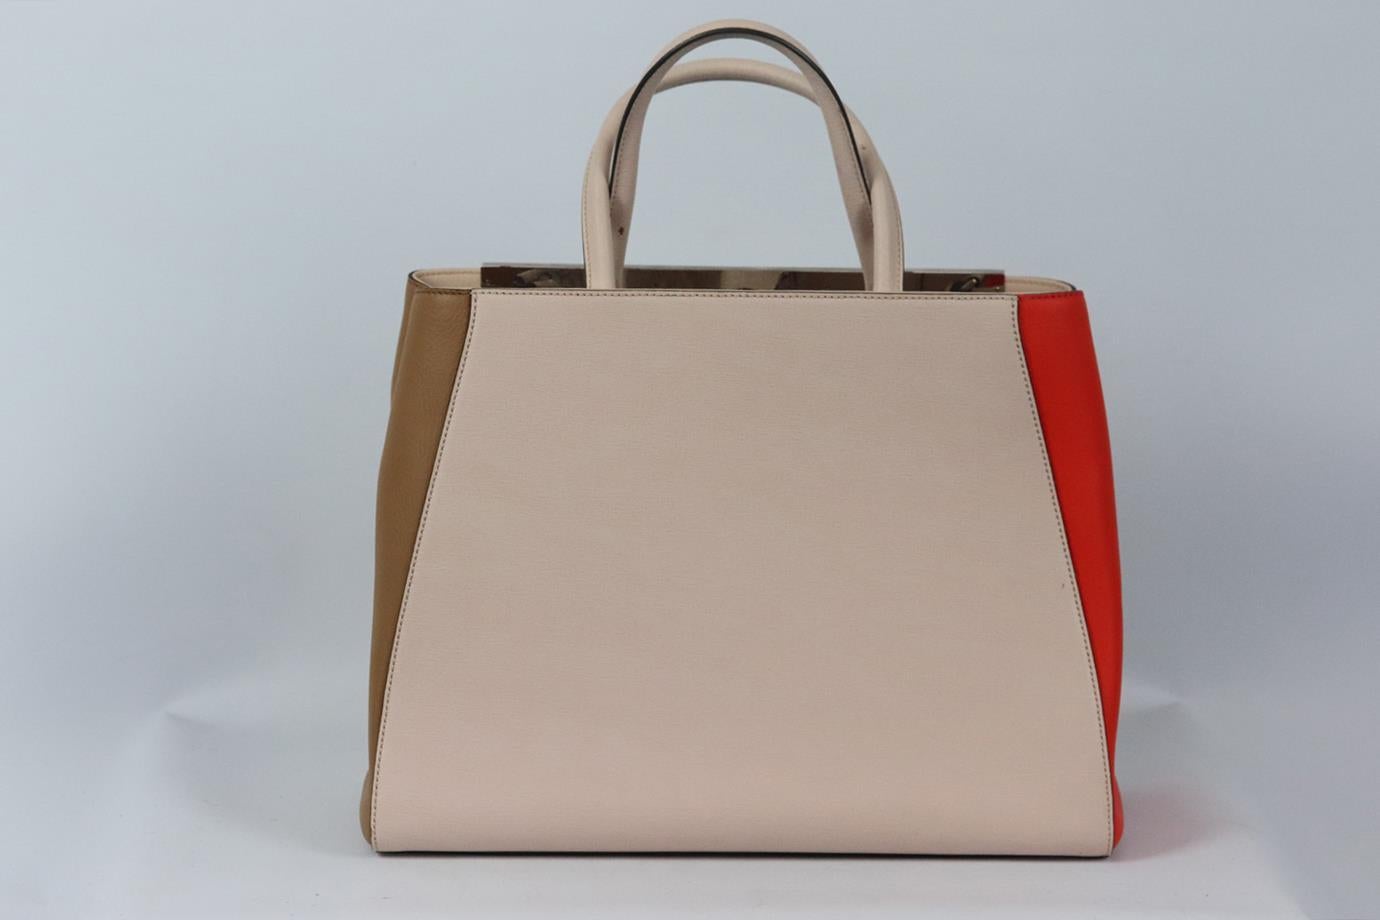 Fendi 2jours Medium Textured Leather Tote Bag In Good Condition For Sale In London, GB